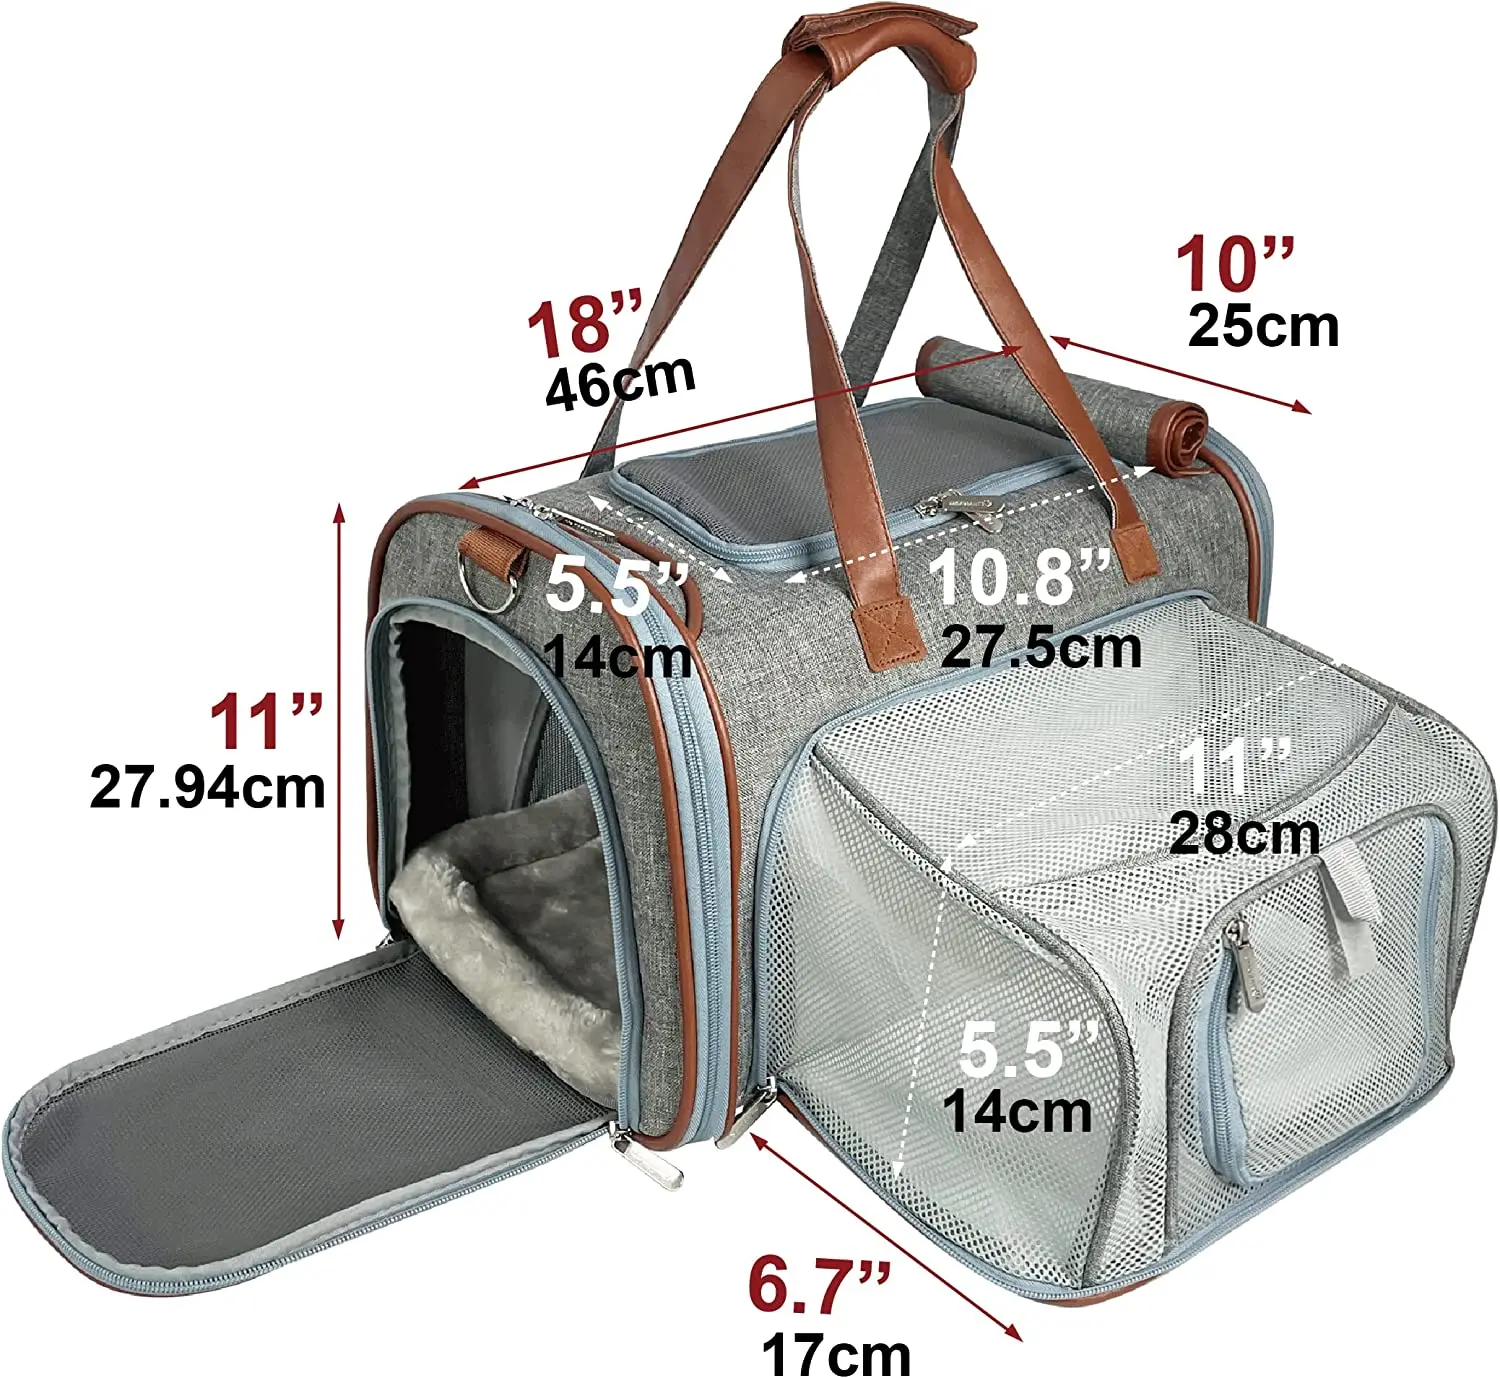  Premium Double Expandable Airline Approved Pet Carrier, Soft  Sided Cat and Dog Carrier Bag, Pet Travel Carrier with Plush Fleece Bedding  for Airplanes, Cars, Travel Tote with Seatbelt Strap 